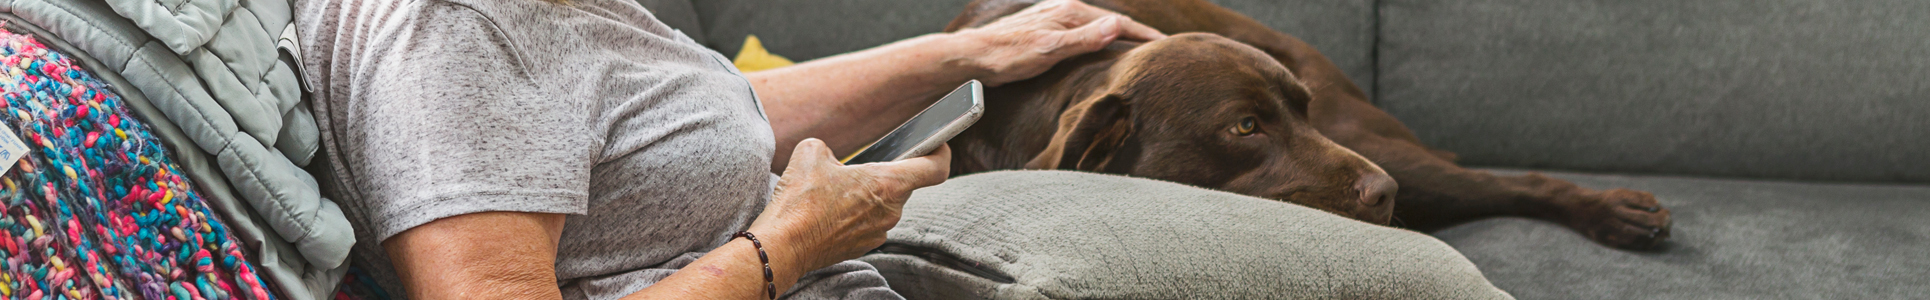 Close up of person sitting on phone on couch with hand laid on dog resting nearby